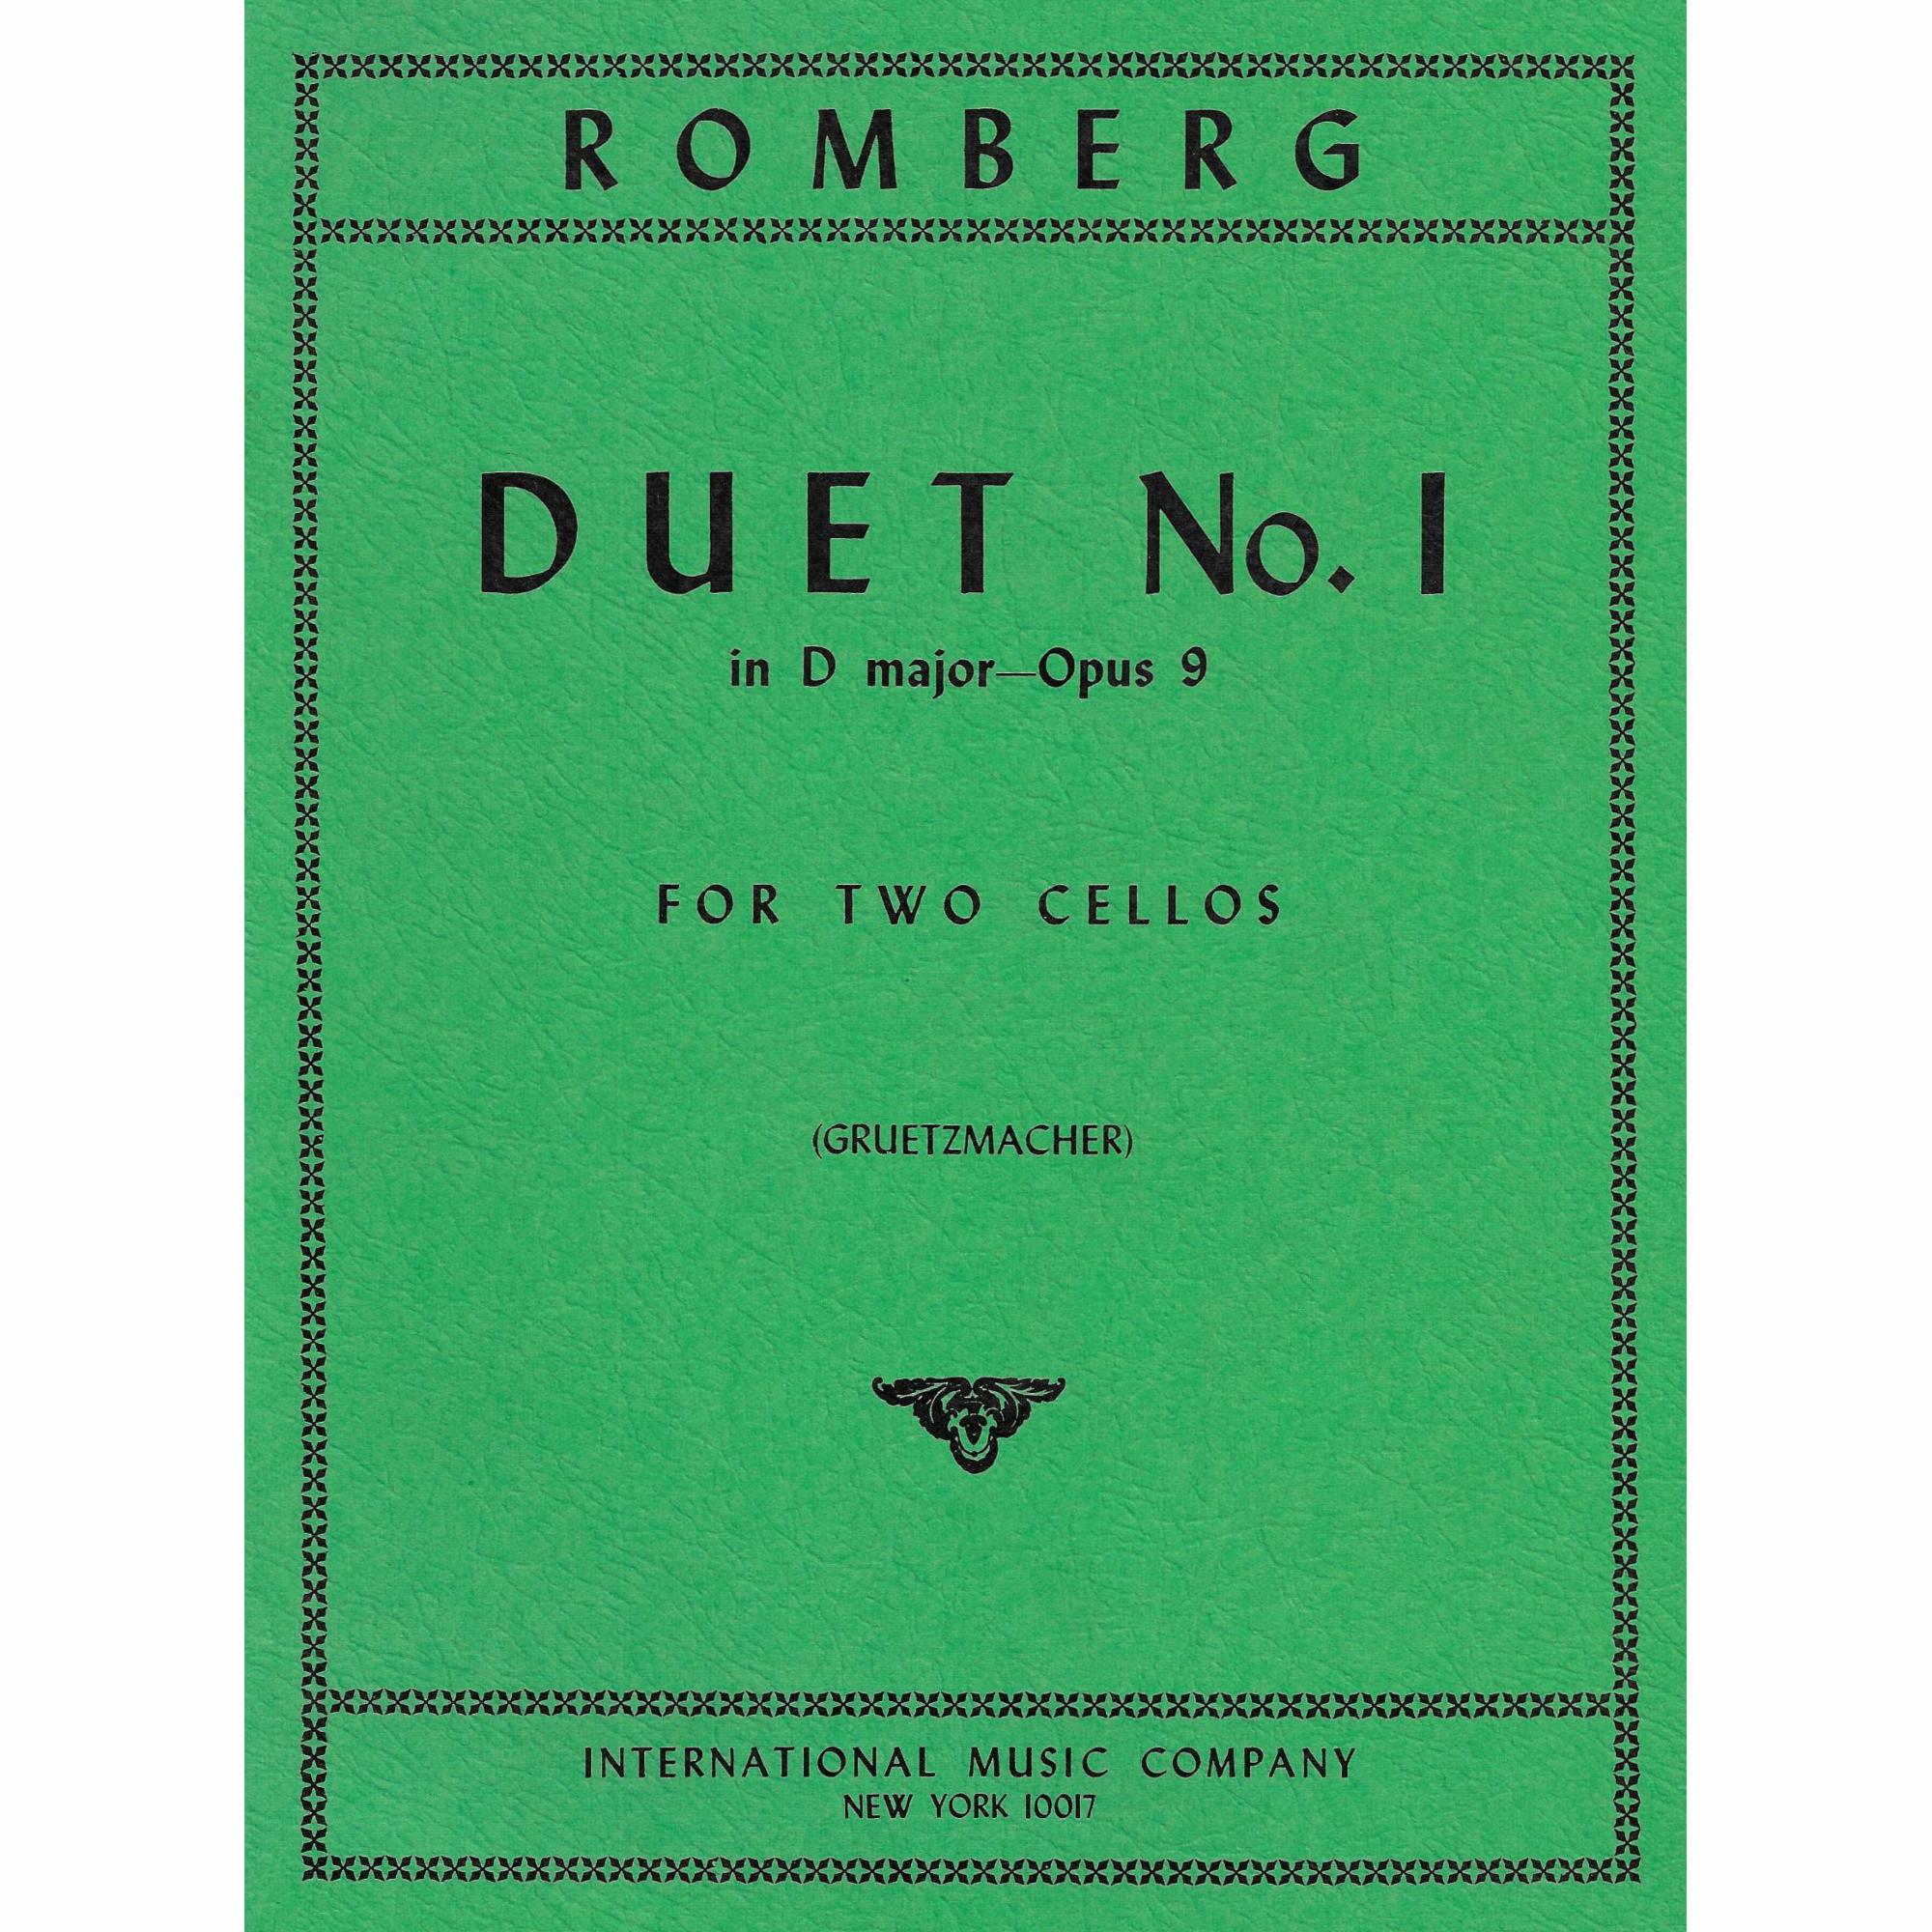 Romberg -- Duet No. 1 in D Major, Op. 9 for Two Cellos